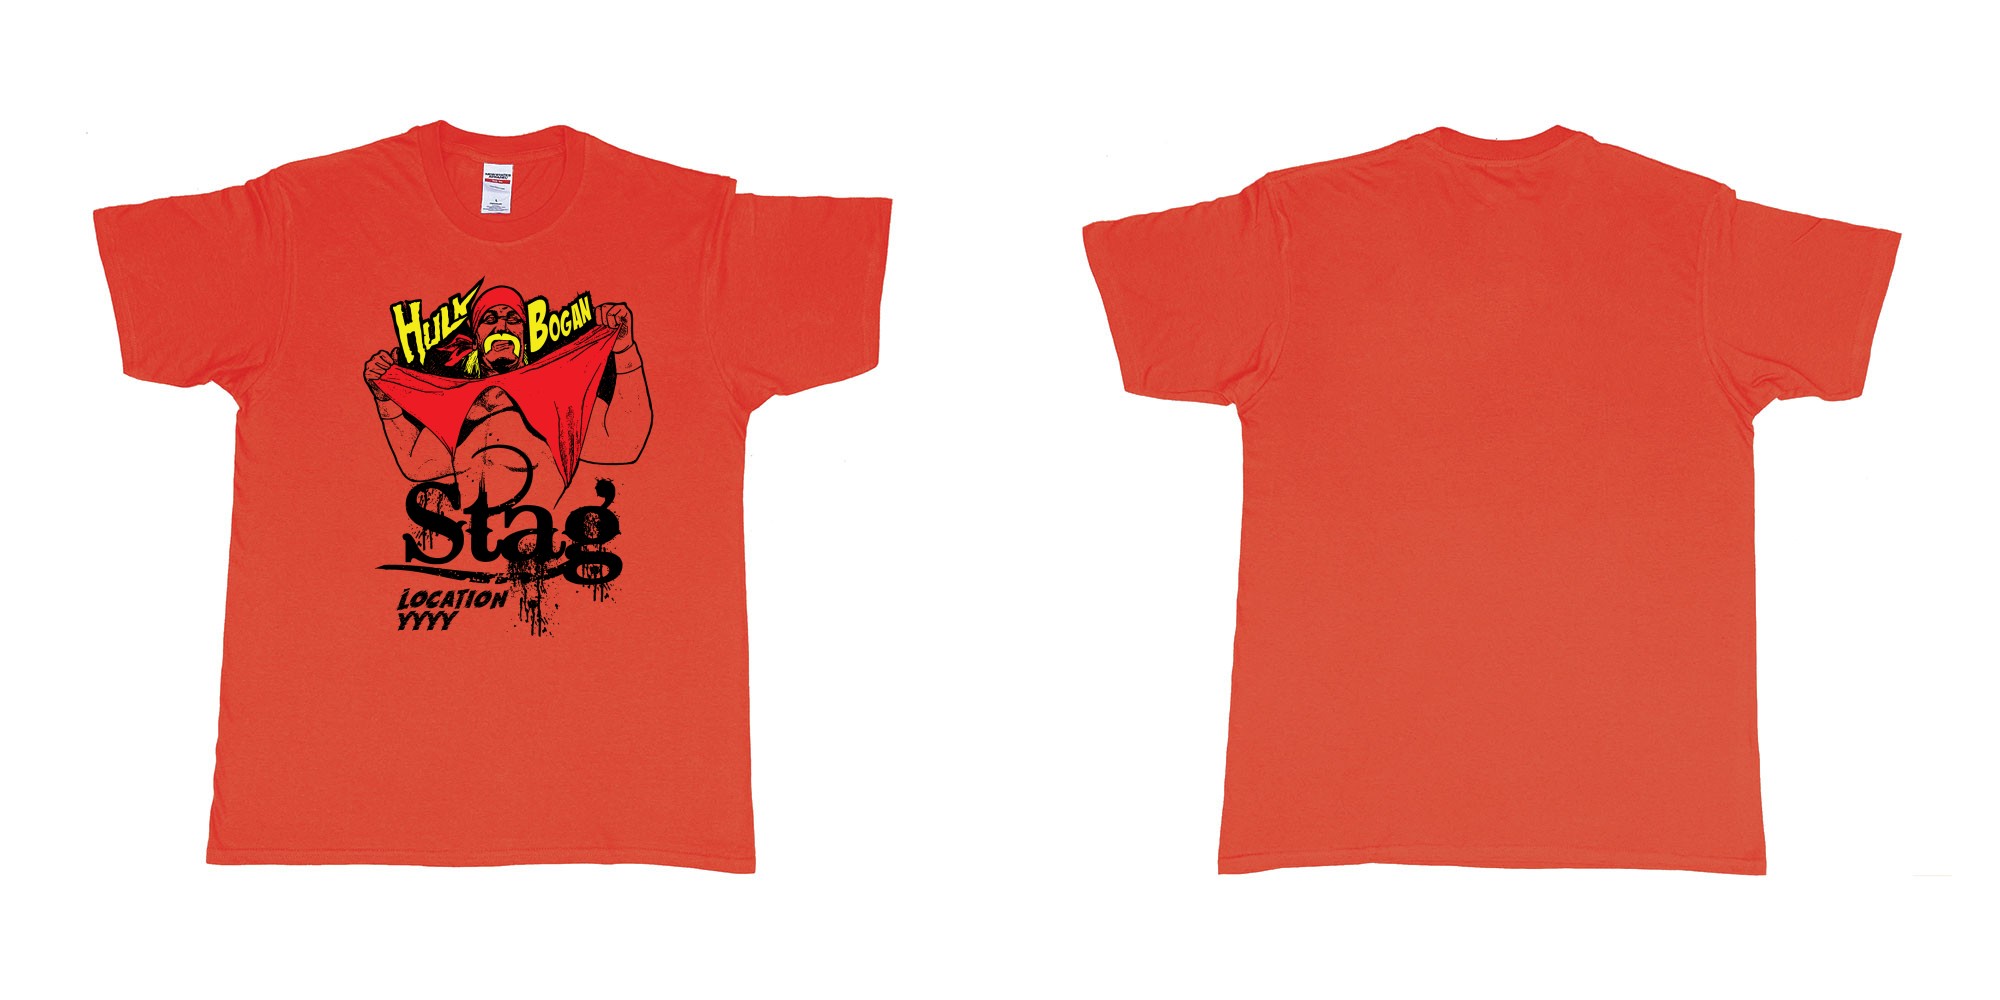 Custom tshirt design hulk hogan bogan in fabric color red choice your own text made in Bali by The Pirate Way